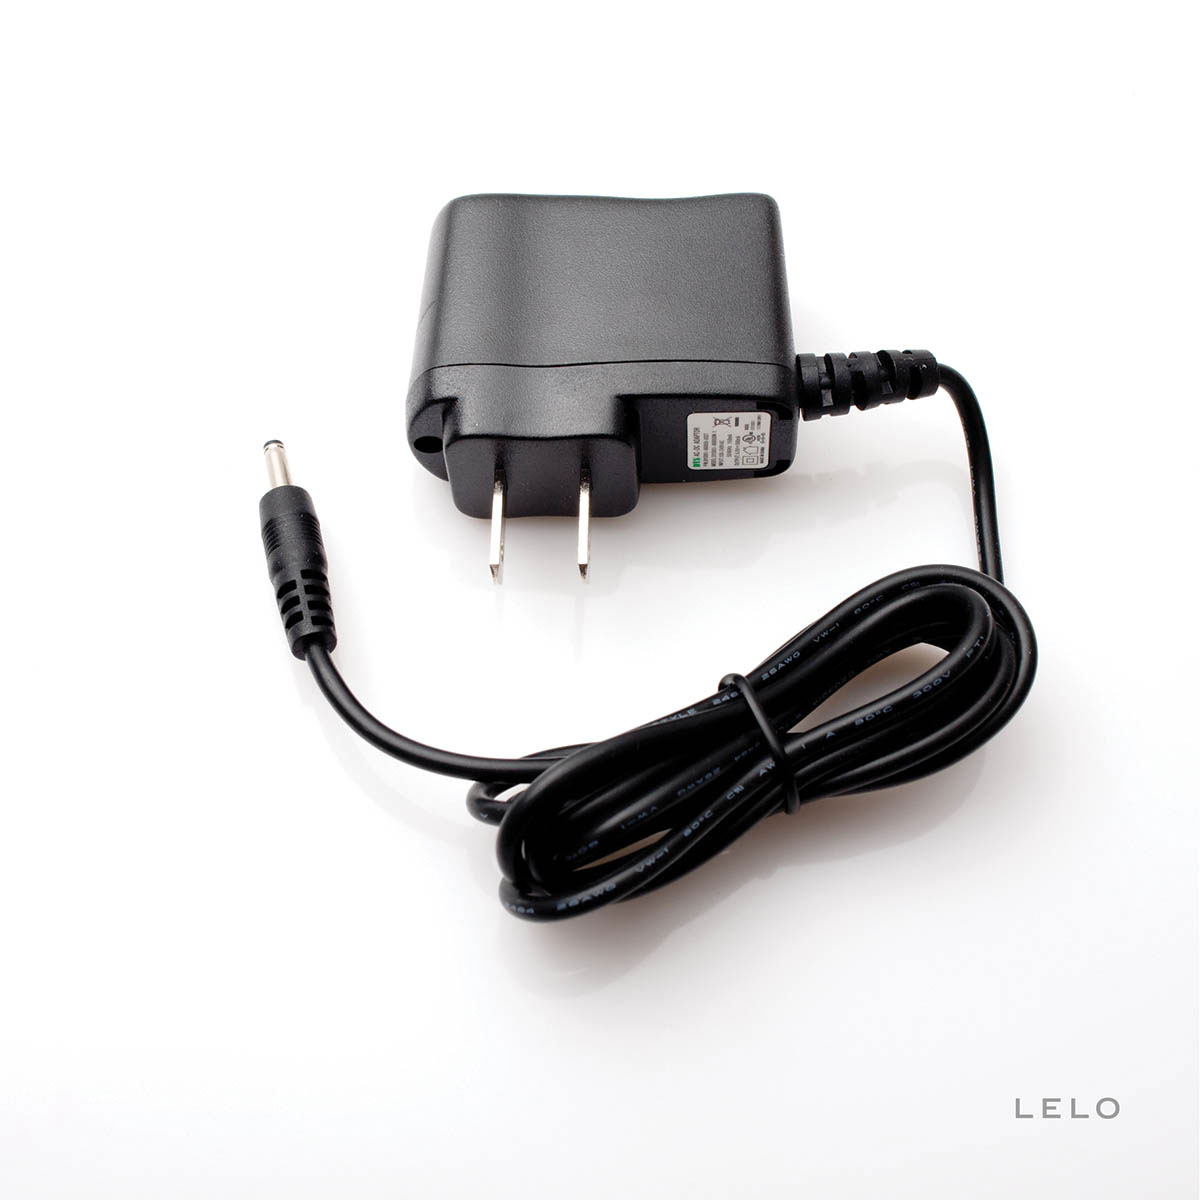 Buy LELO Charger   110V Type A  USA  power accessories for your vibrators, kegel exercise devices, and more.